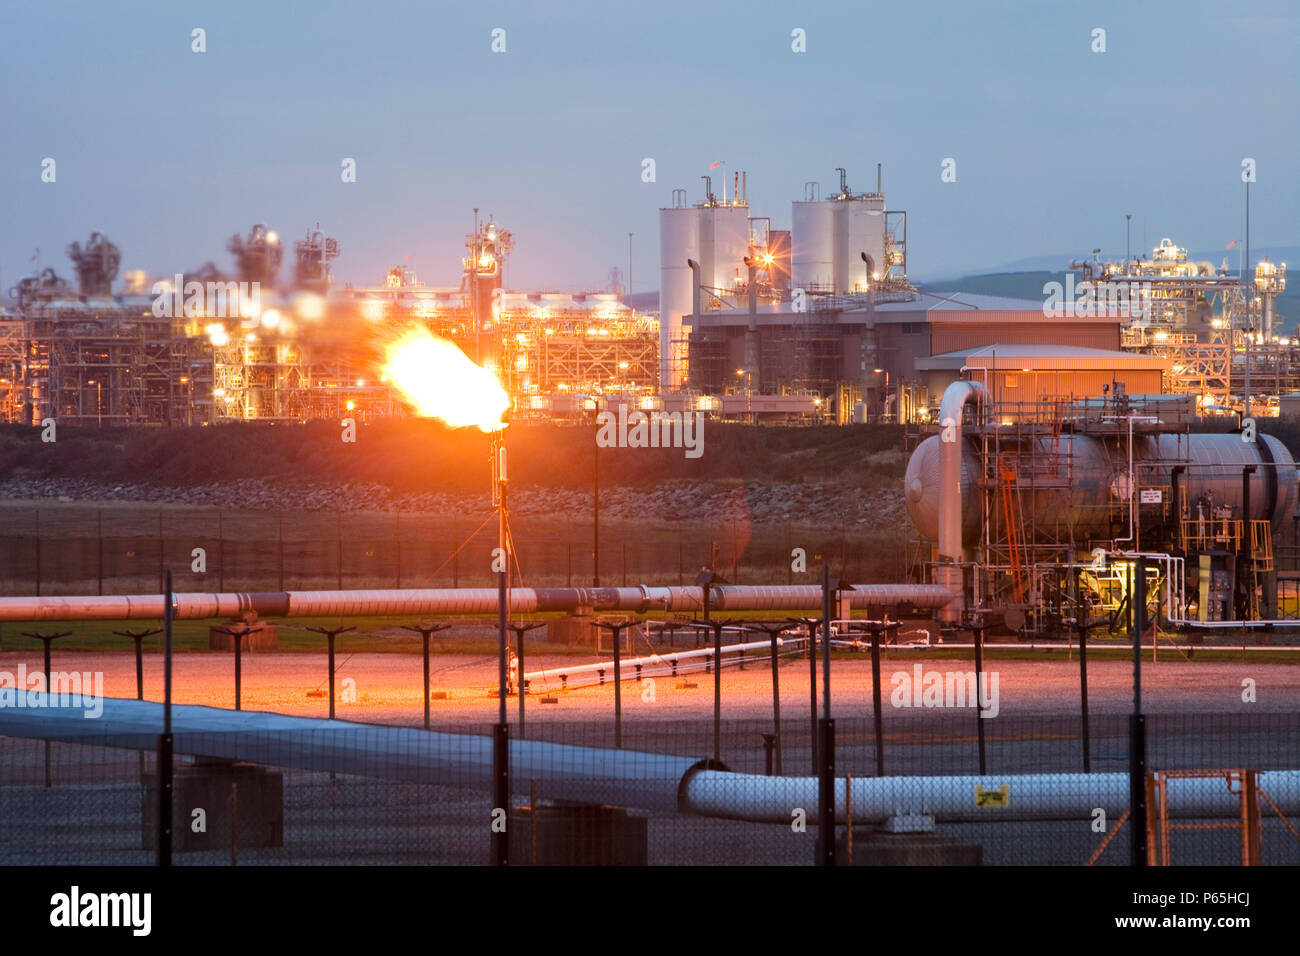 Gas being flared off at Centrica's gas plant in Barrow in Furness. This plant processes gas from the Morecambe bay gas field, Cumbria, UK. Stock Photo